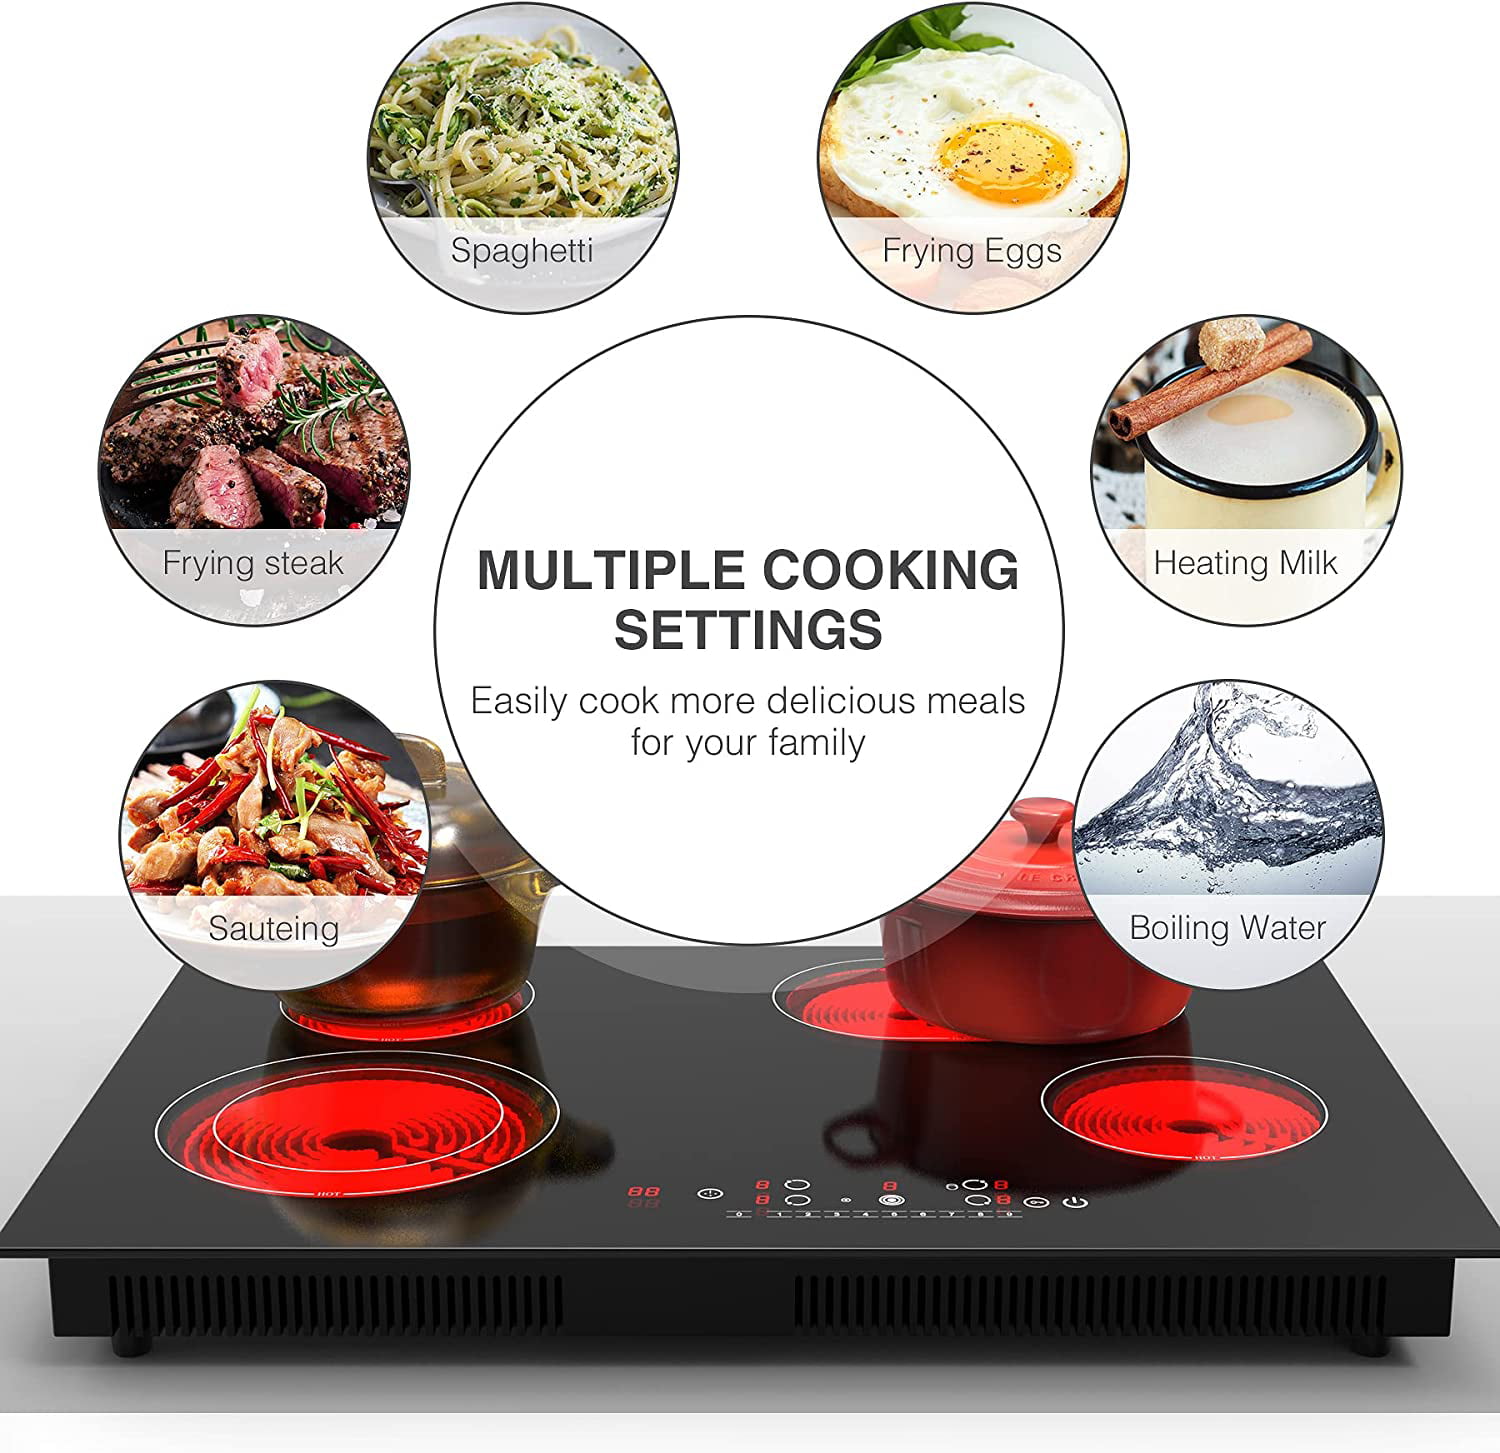 Cooksir Electric Cooktop 24 Inch, 4 Burner Electric Stove Top 6000W,  Built-in Radiant Electric Stovetop with 9 Heating Level, Auto Shut Down